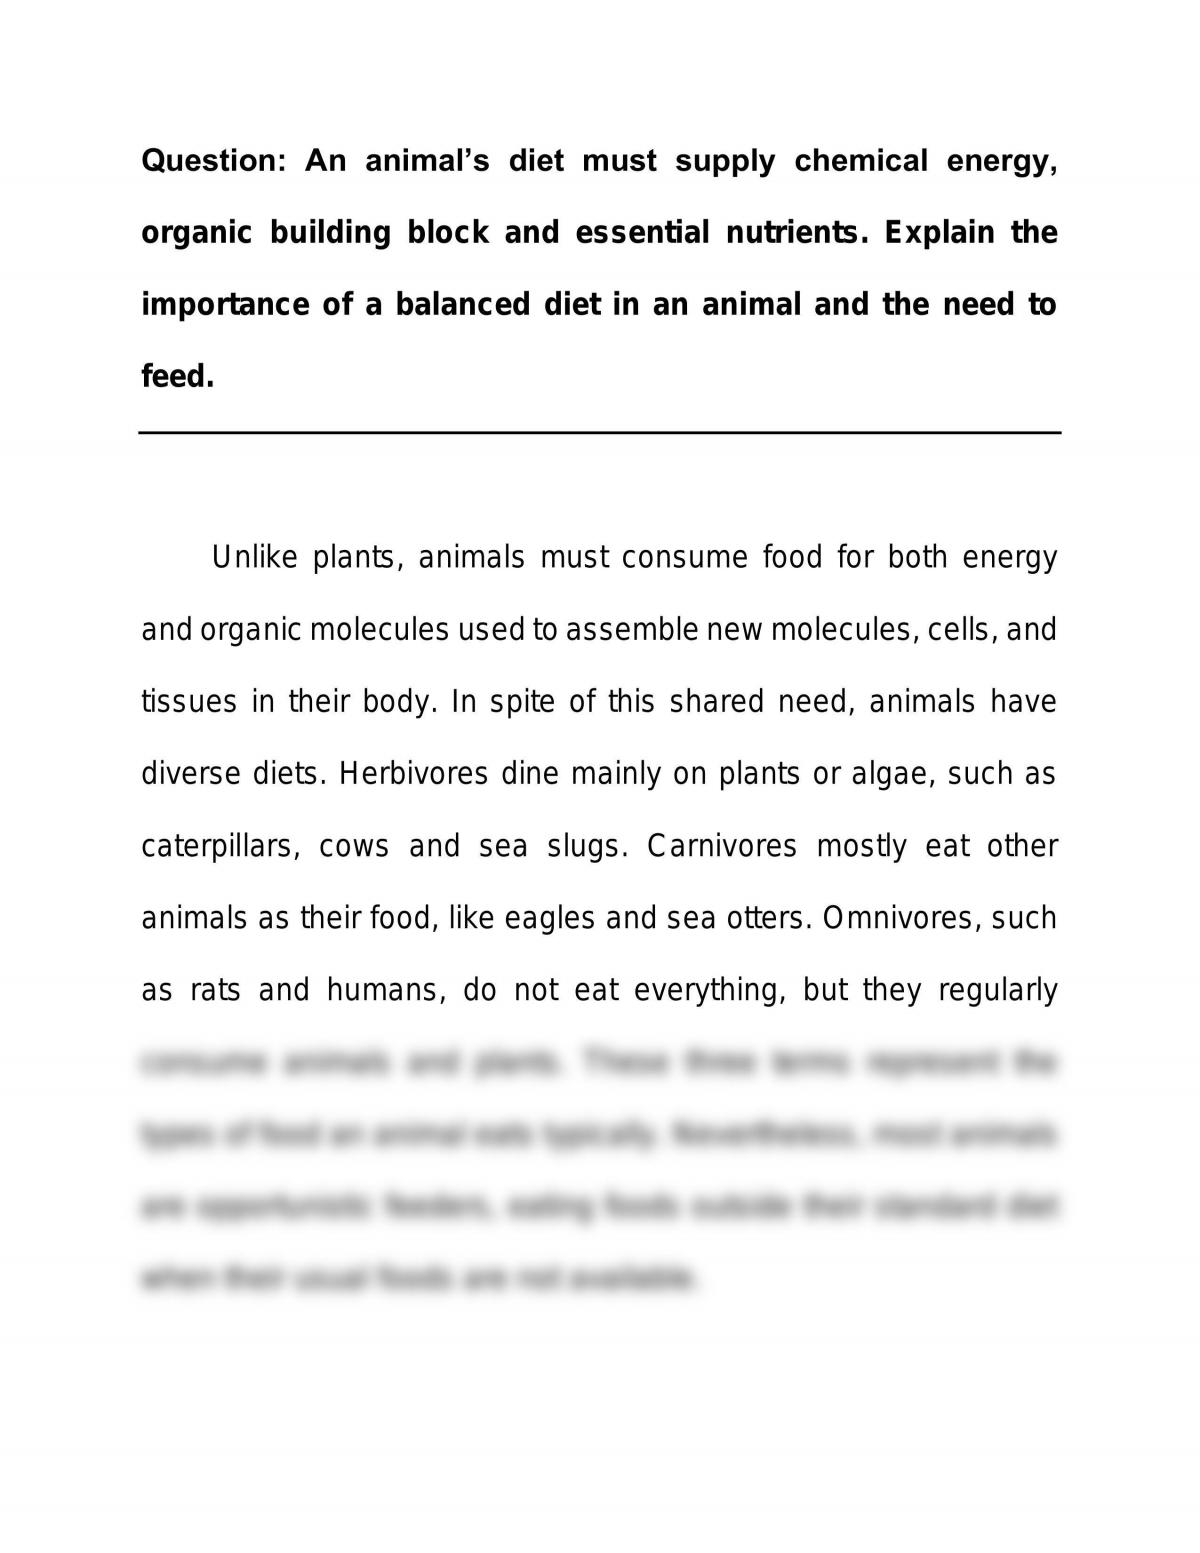 Essay Discussing the Importance of a Balanced Diet in an Animal | Biology -  STPM | Thinkswap